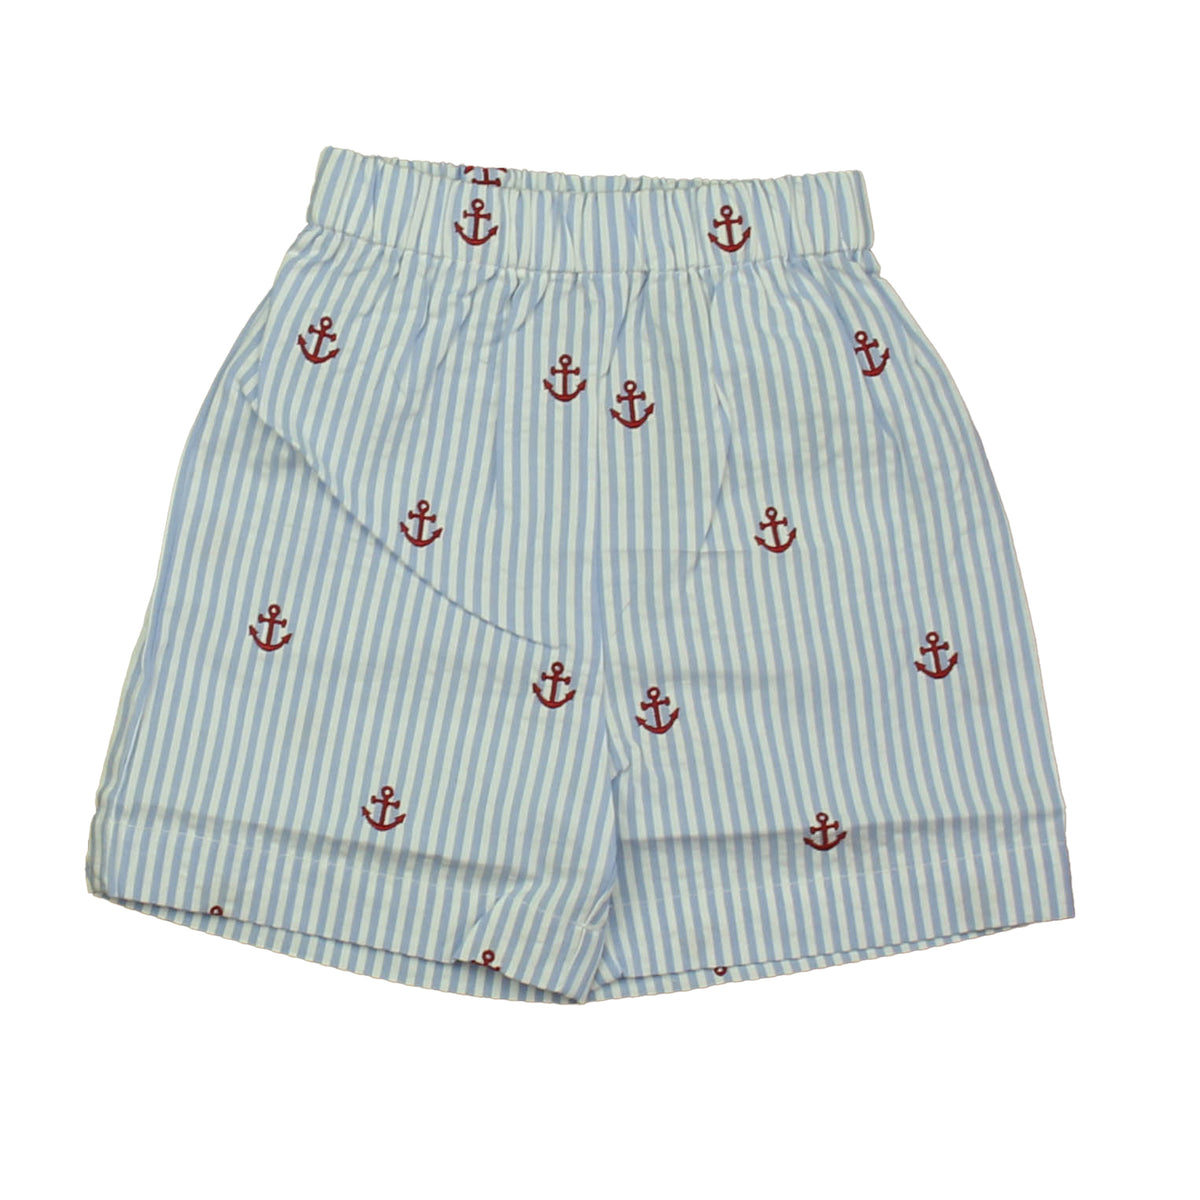 New with Tags: Red Anchors on Blue Seersucker Shorts -- FINAL SALE